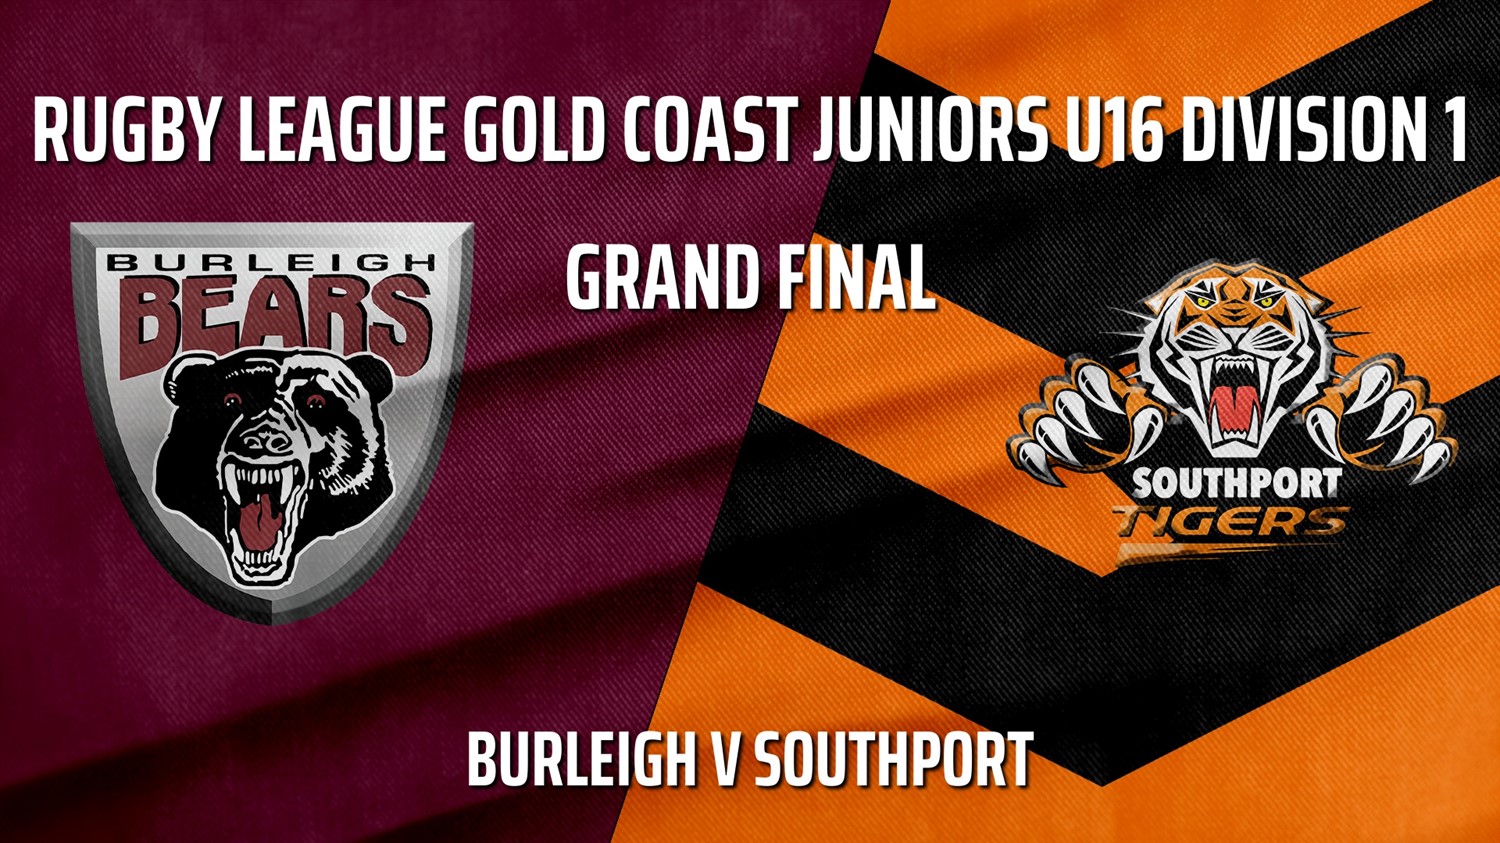 210925-Rugby League Gold Coast Juniors U16 Division 1 Grand Final - Burleigh Bears v Southport Tigers Slate Image